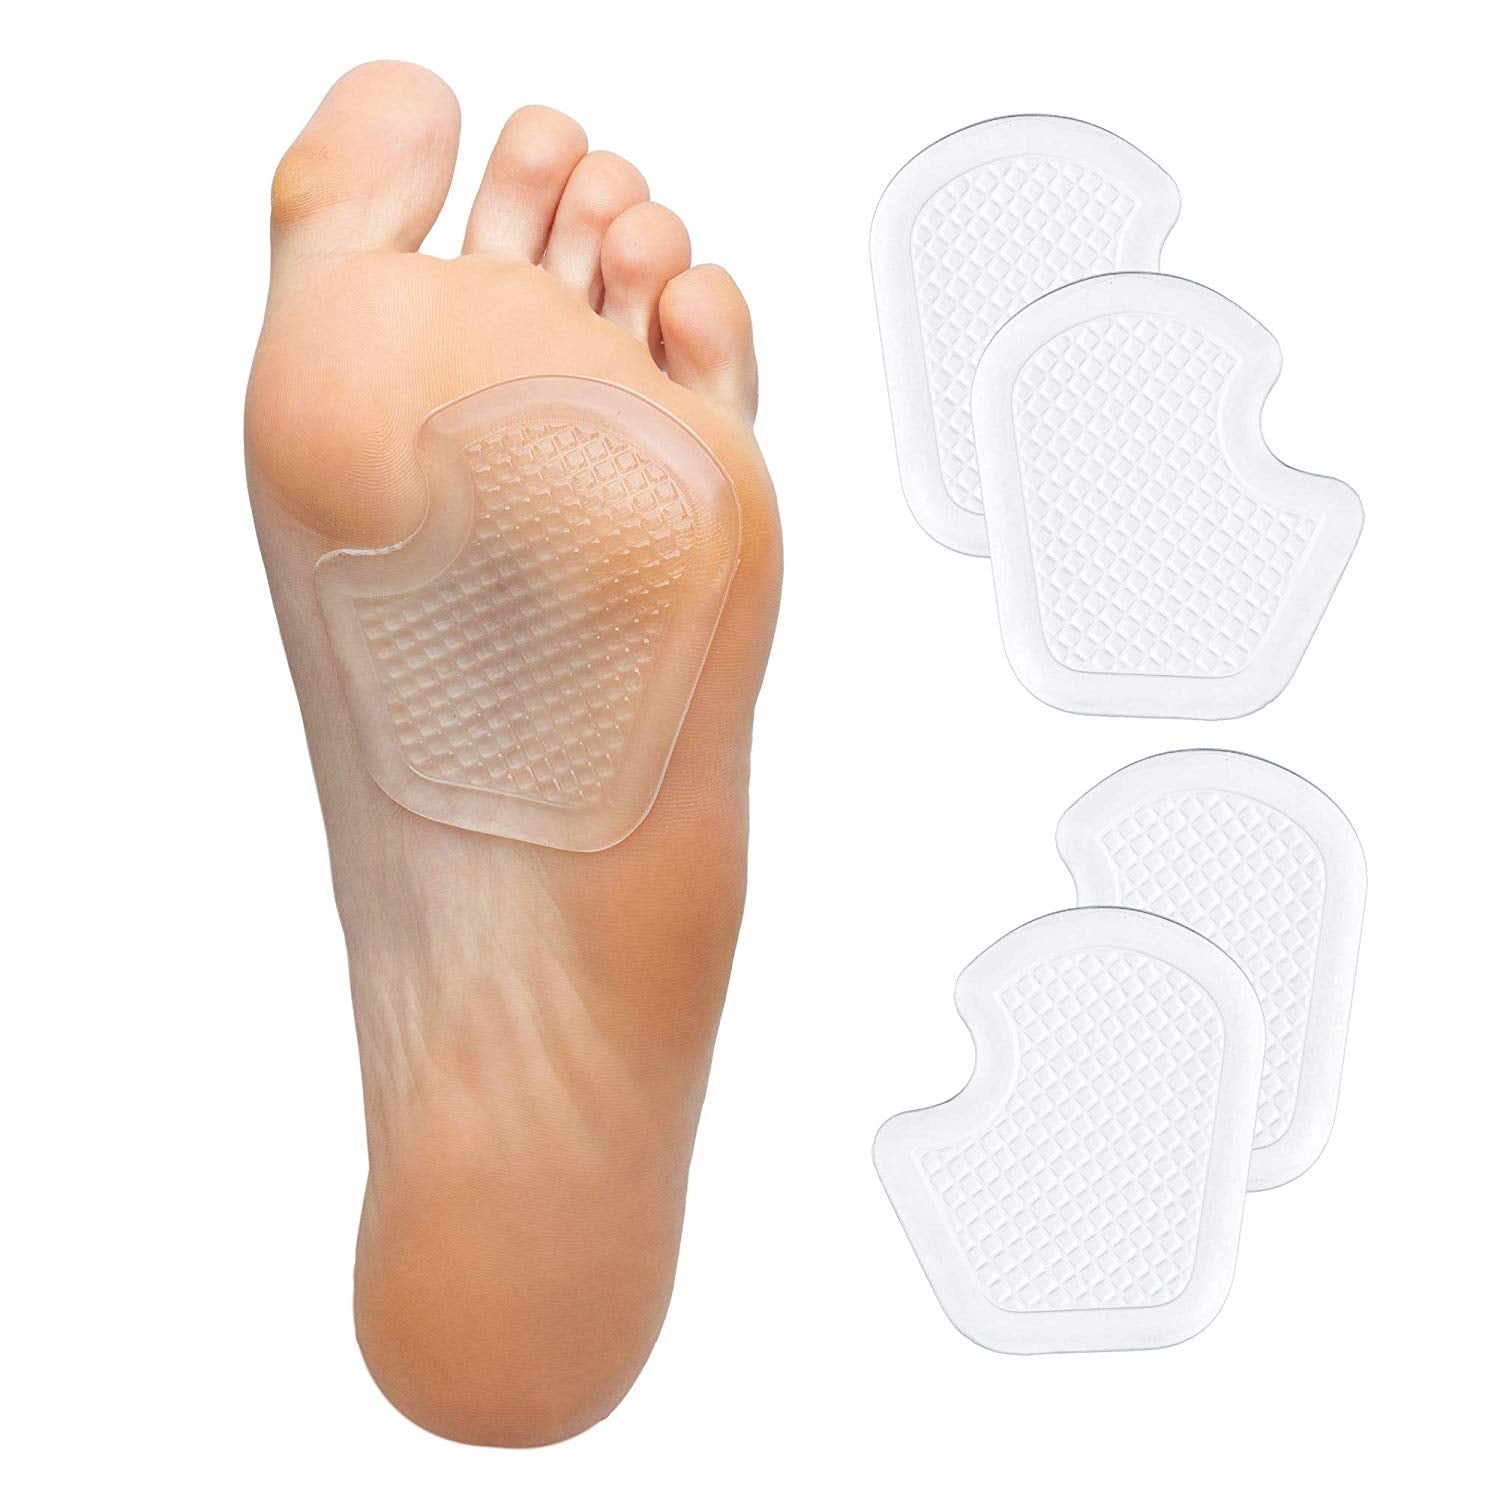 ZenToes Dancer Pads 4 Count Gel Cushions Protect and Relieve Metatarsal, Sesamoid, Ball of Foot Pain - 2 Pairs